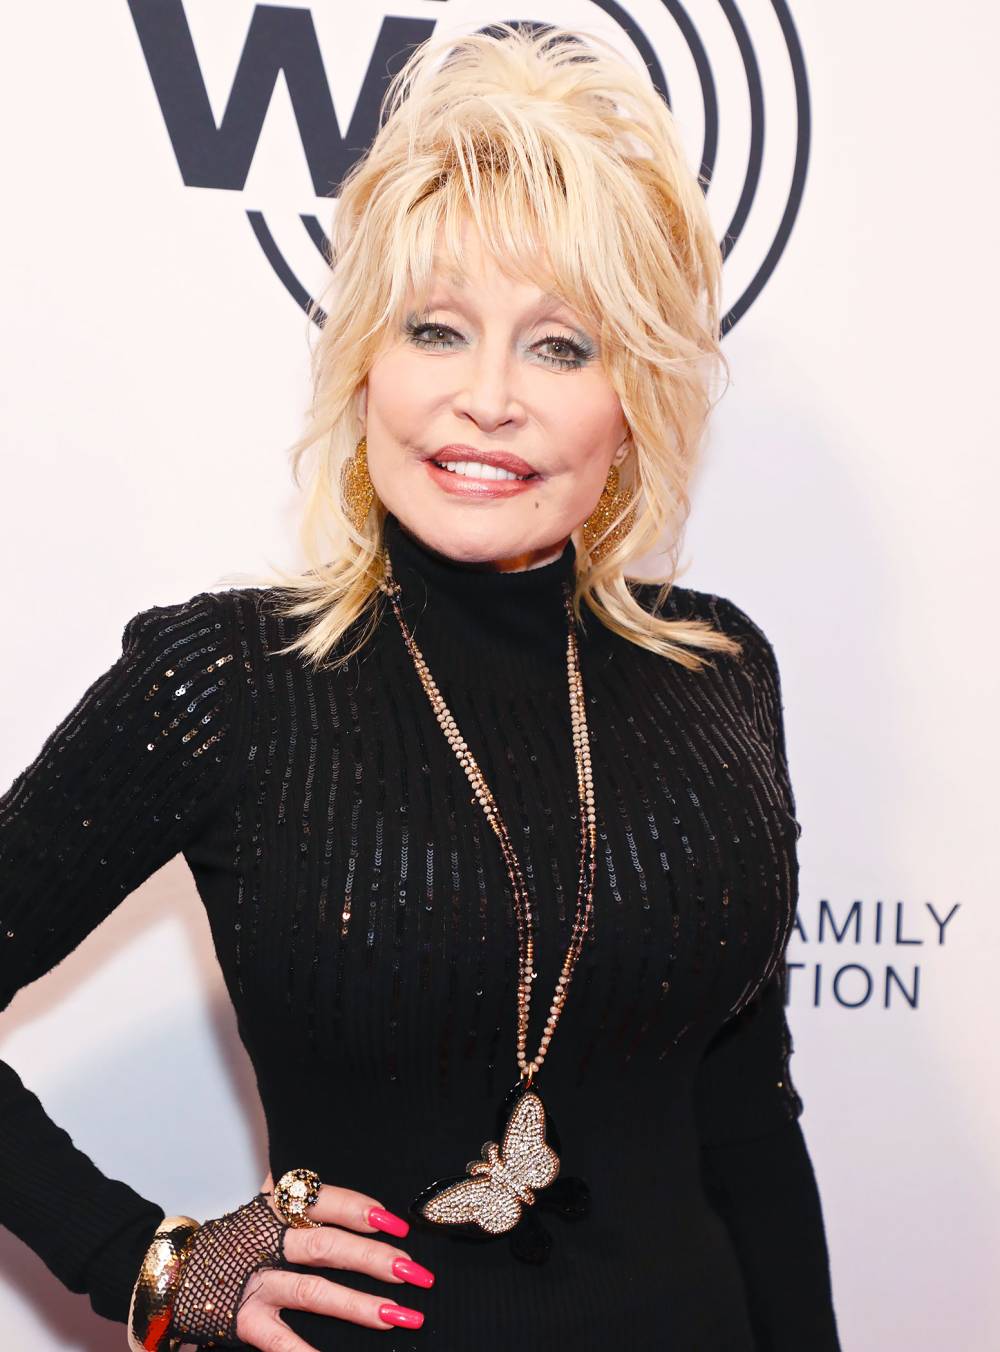 The Hilarious Reason Dolly Parton Sleeps With a Full Face of Makeup